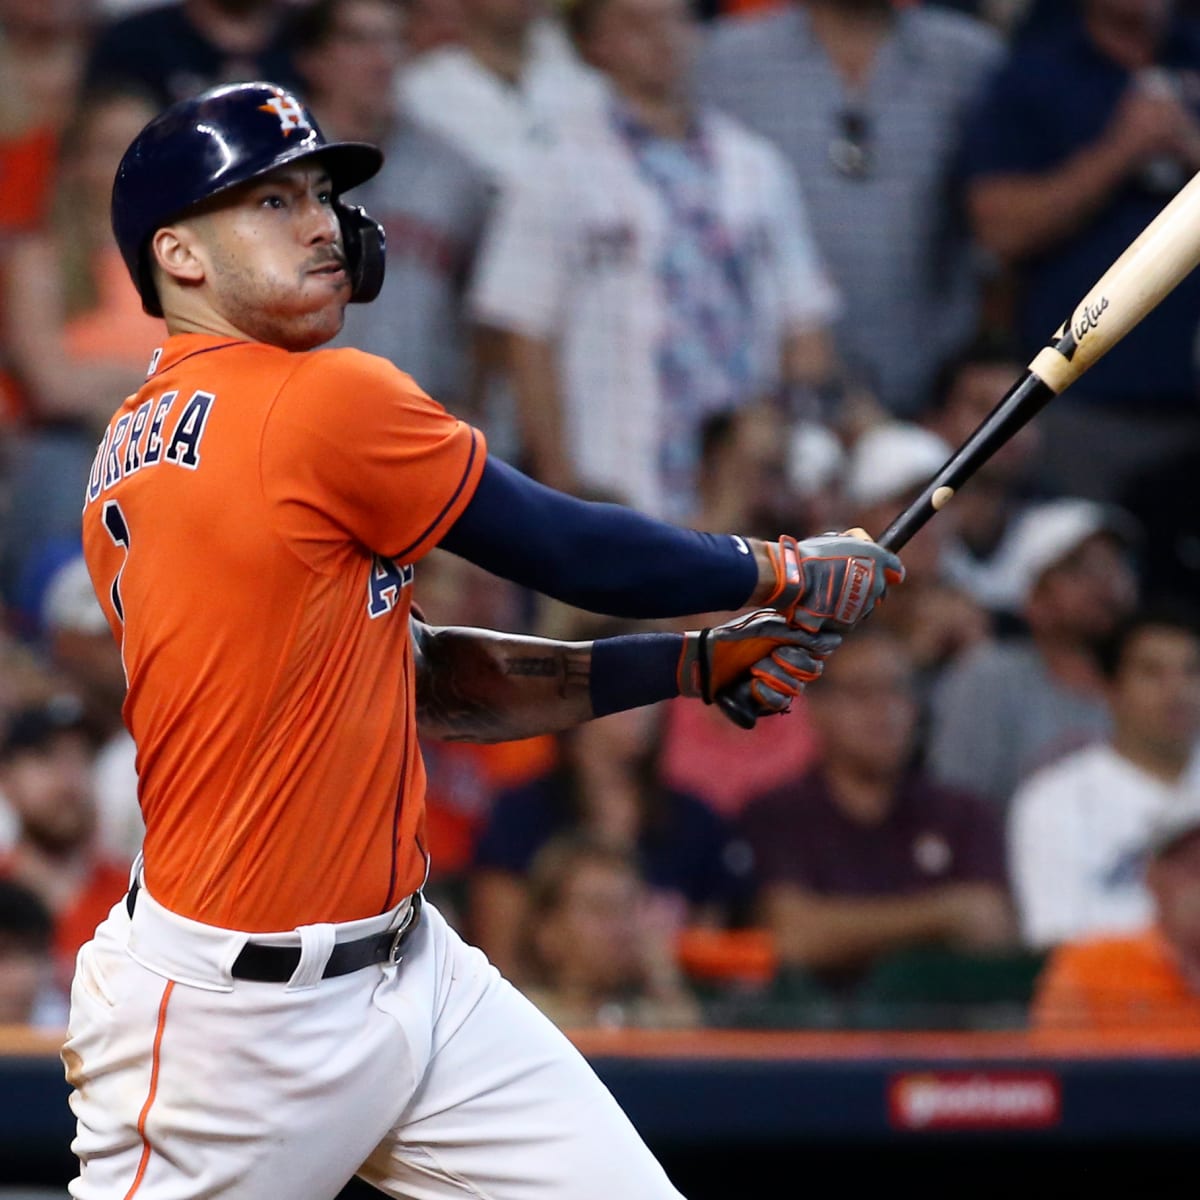 MLB playoffs: Why the Astros are so dominant in the postseason